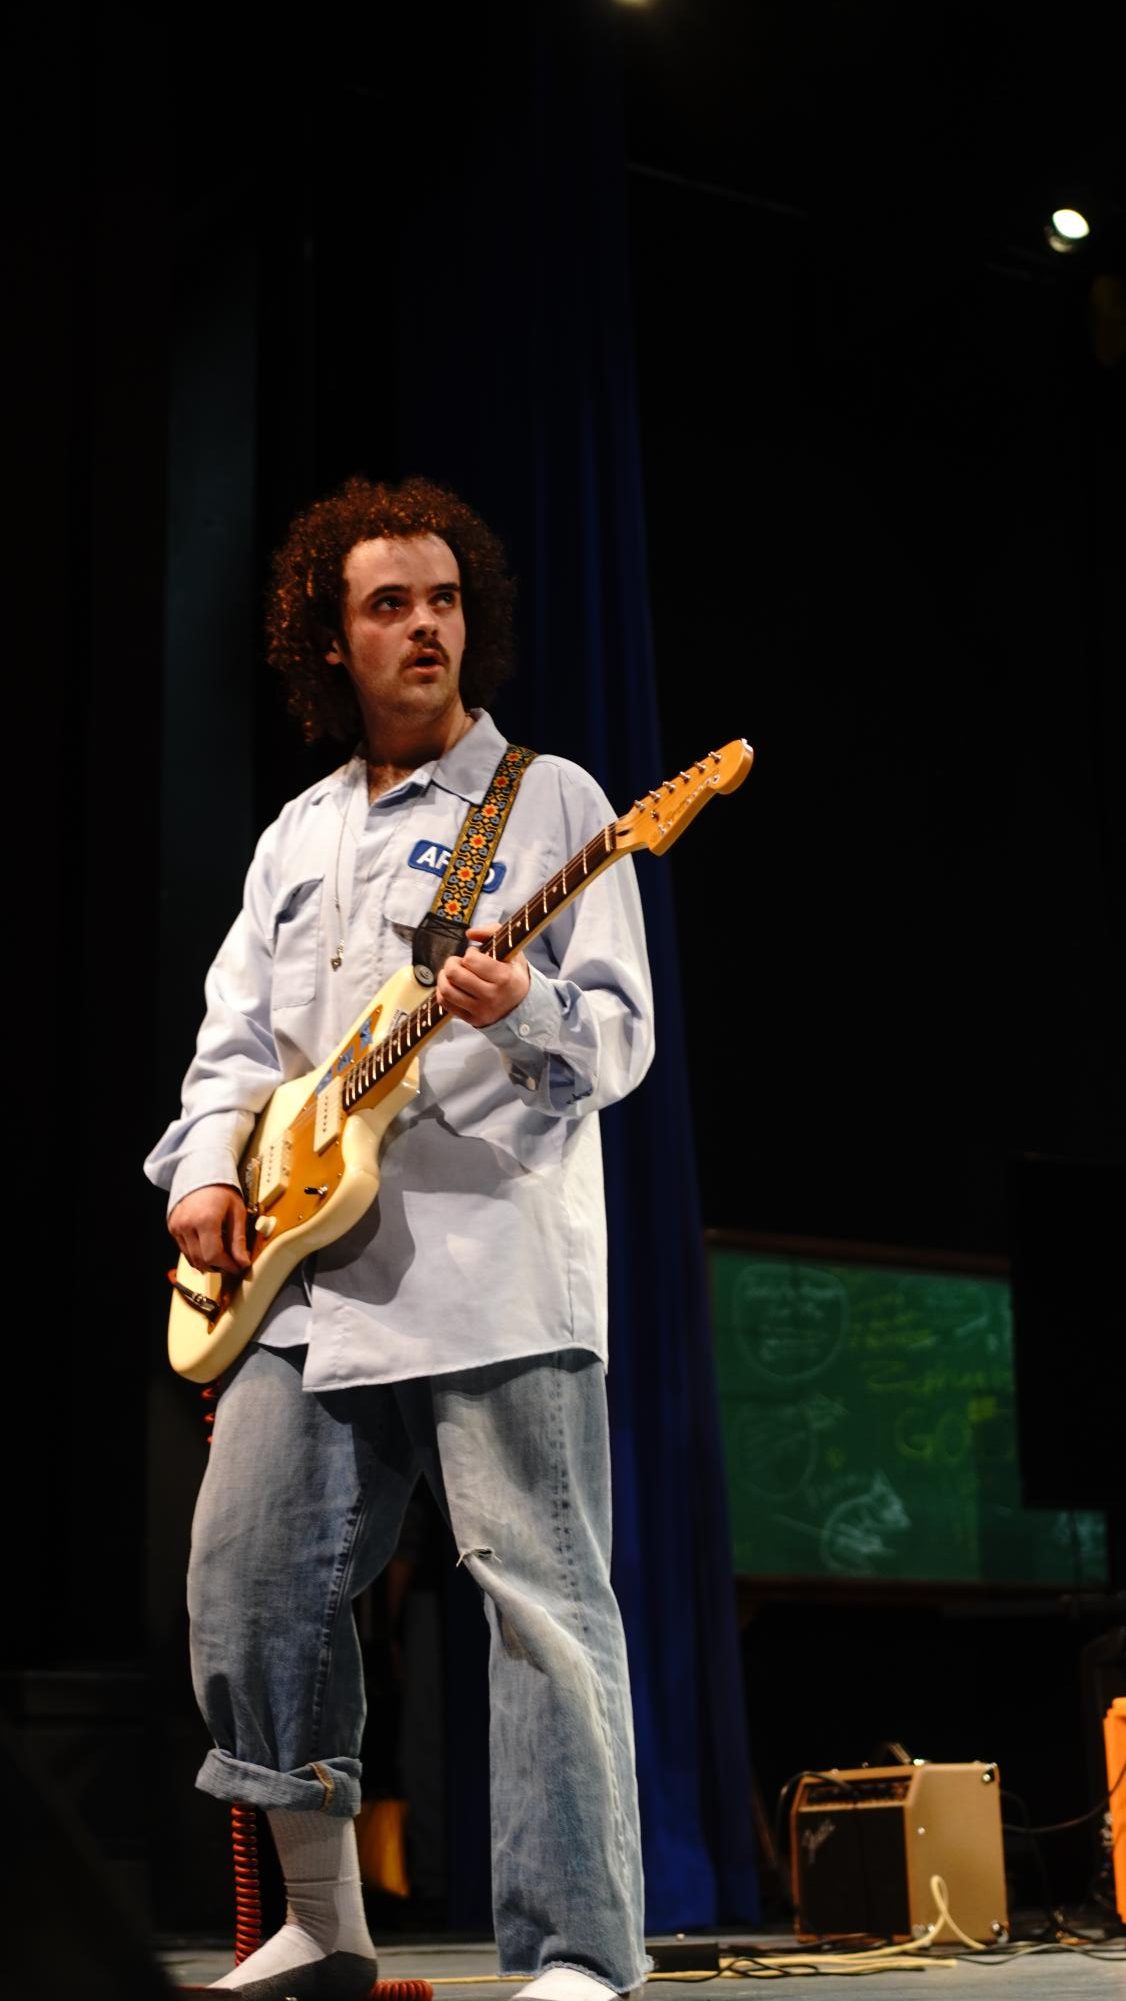 NO NEED TO PIPE DOWN: For senior Lucas Hendrix, this year’s Battle of the Bands competition marked the first time he was interested in participating. Alongside the rest of the band “Pipe,” Hendrix took the stage of the McCallum Fine Arts Building Theater. A bit different from the gigs he’s used to playing, so Hendrix wasn’t sure how the atmosphere would be.

“[It was ] actually lit,” Hendrix said. “I didn’t think people would be that close, but they were up! I didn’t have to look anywhere behind them, so I wasn’t nervous; it was normal.”

This closeness was brought on by the removal of a stage extension, a surprising but welcome elimination that changed the energy of the contest for the better.

“That extension of the stage is gone, which left a space for young moshers to go hard to pipe.”

Though he was performing for a different crowd than usual, Hendrix was grateful for his opportunity to be up on stage, playing for fellow students.

“It was entirely for kids and people I know and not for punks and metal-heads,” he said. “I don’t really like that audience.”

This performance marked a changing point for Pipe, who are turning over a creative leaf now that Battle of the Bands is over.

“I think the battle was the last Pipe show as a hardcore punk band,” Hendrix said. “We are going to entirely change.” 

Caption by Helen Martin.